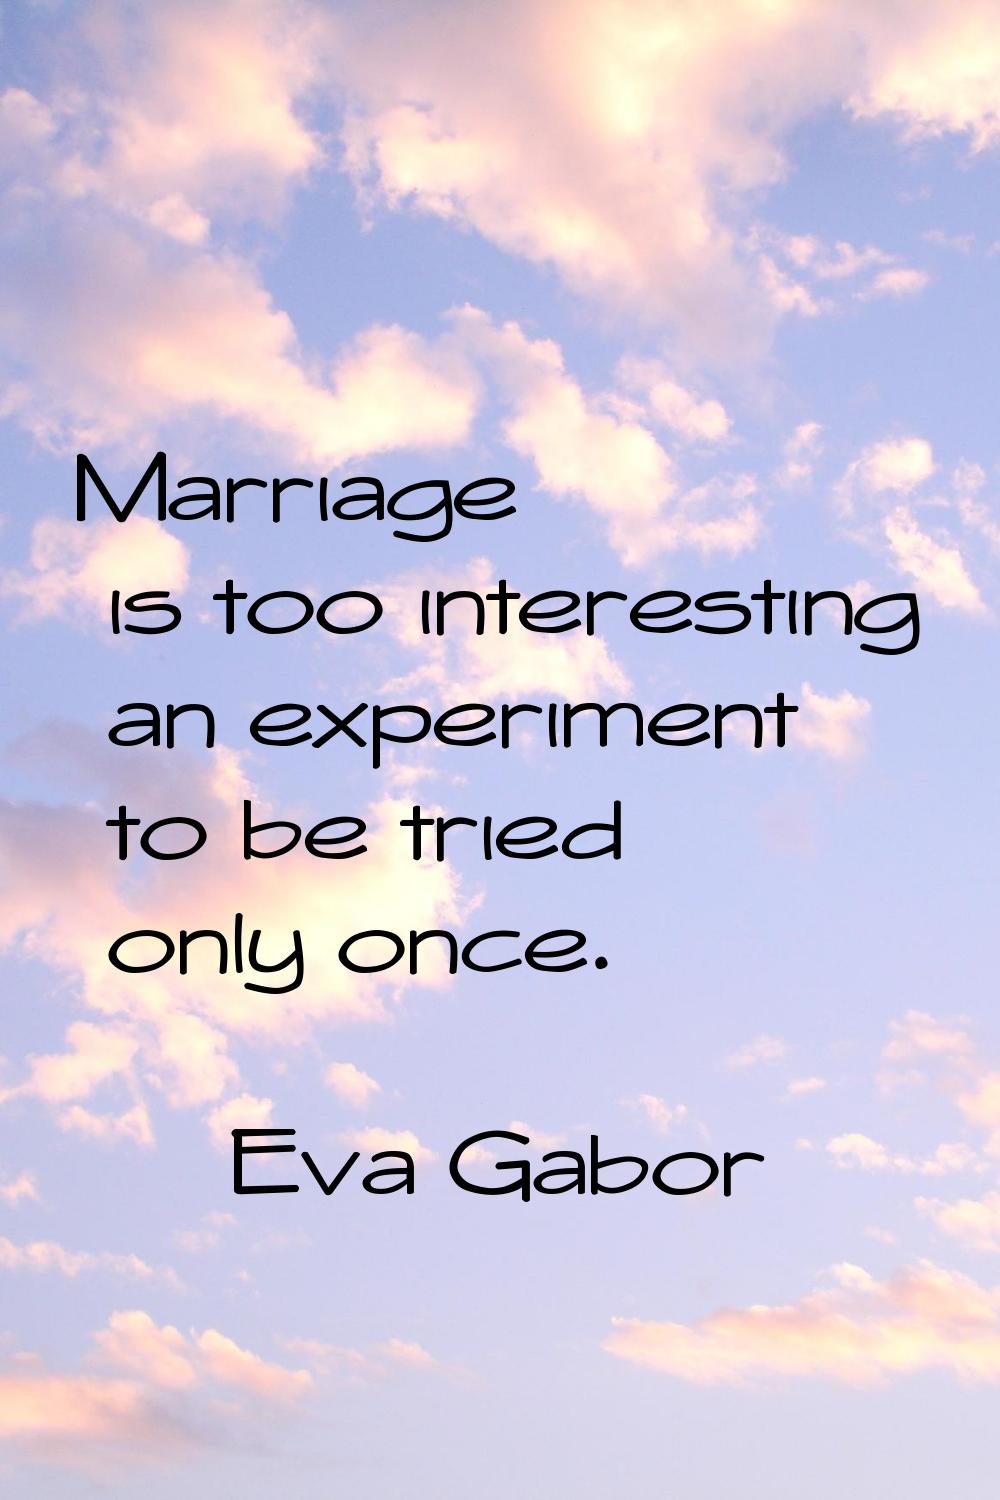 Marriage is too interesting an experiment to be tried only once.